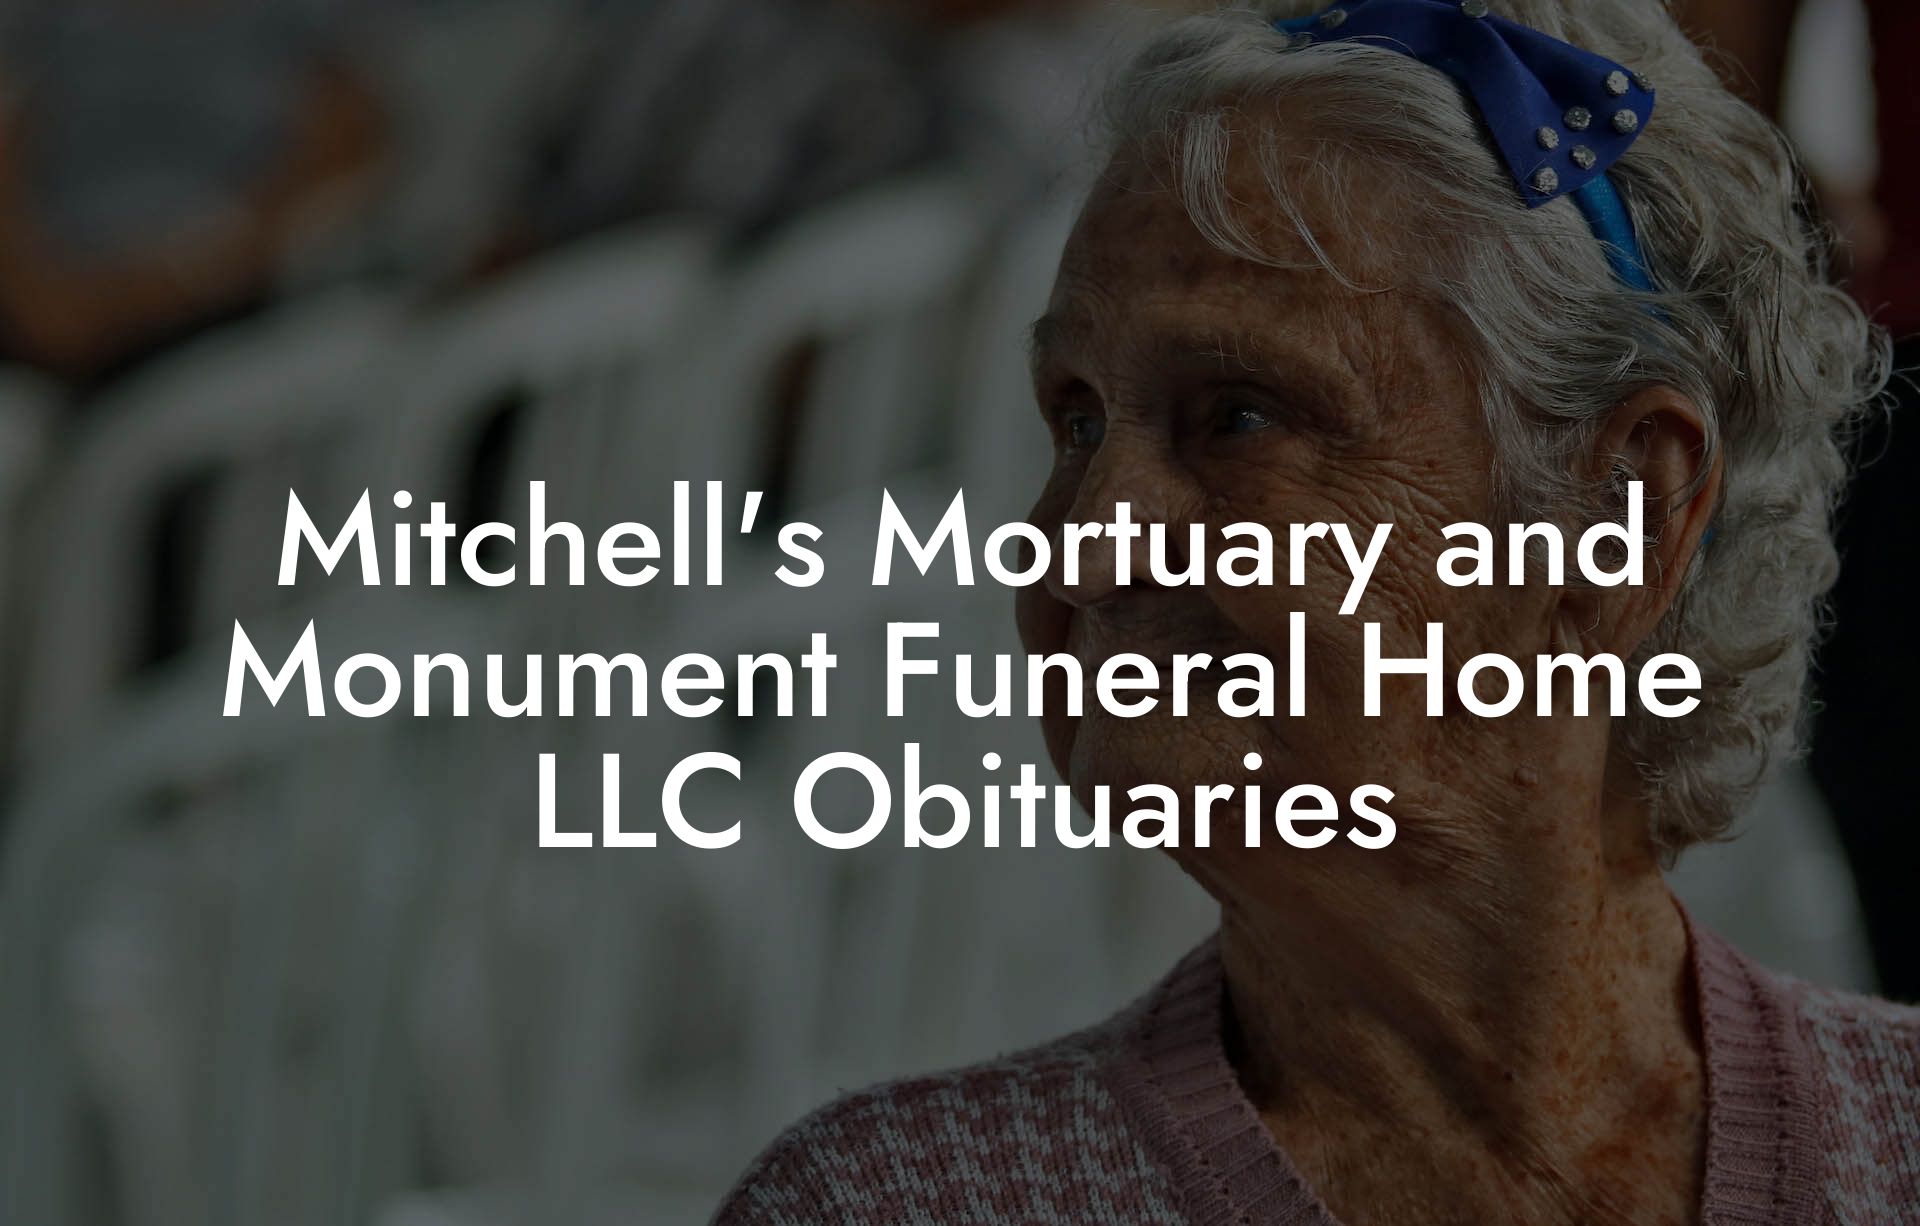 Mitchell's Mortuary and Monument Funeral Home LLC Obituaries